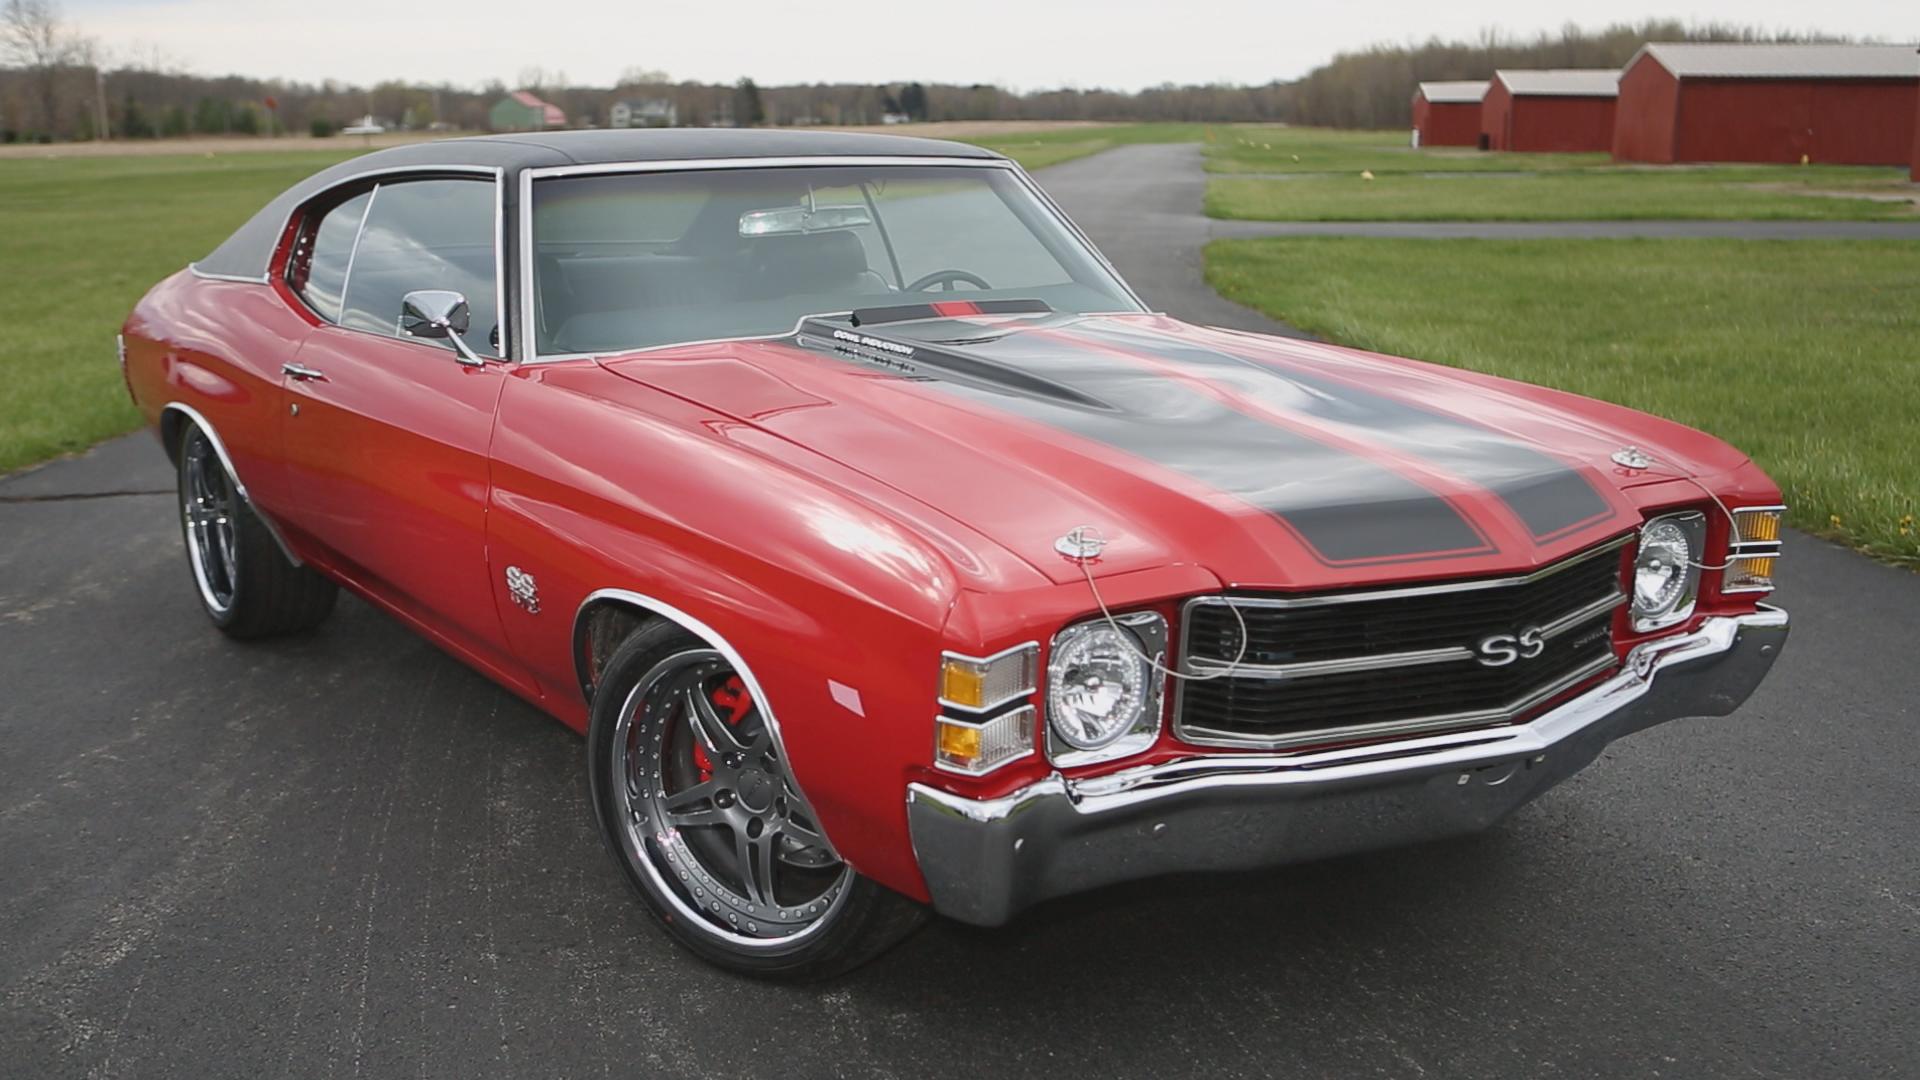 "Fat 'n Furious: Rolling Thunder" 1971 Chevy Chevelle